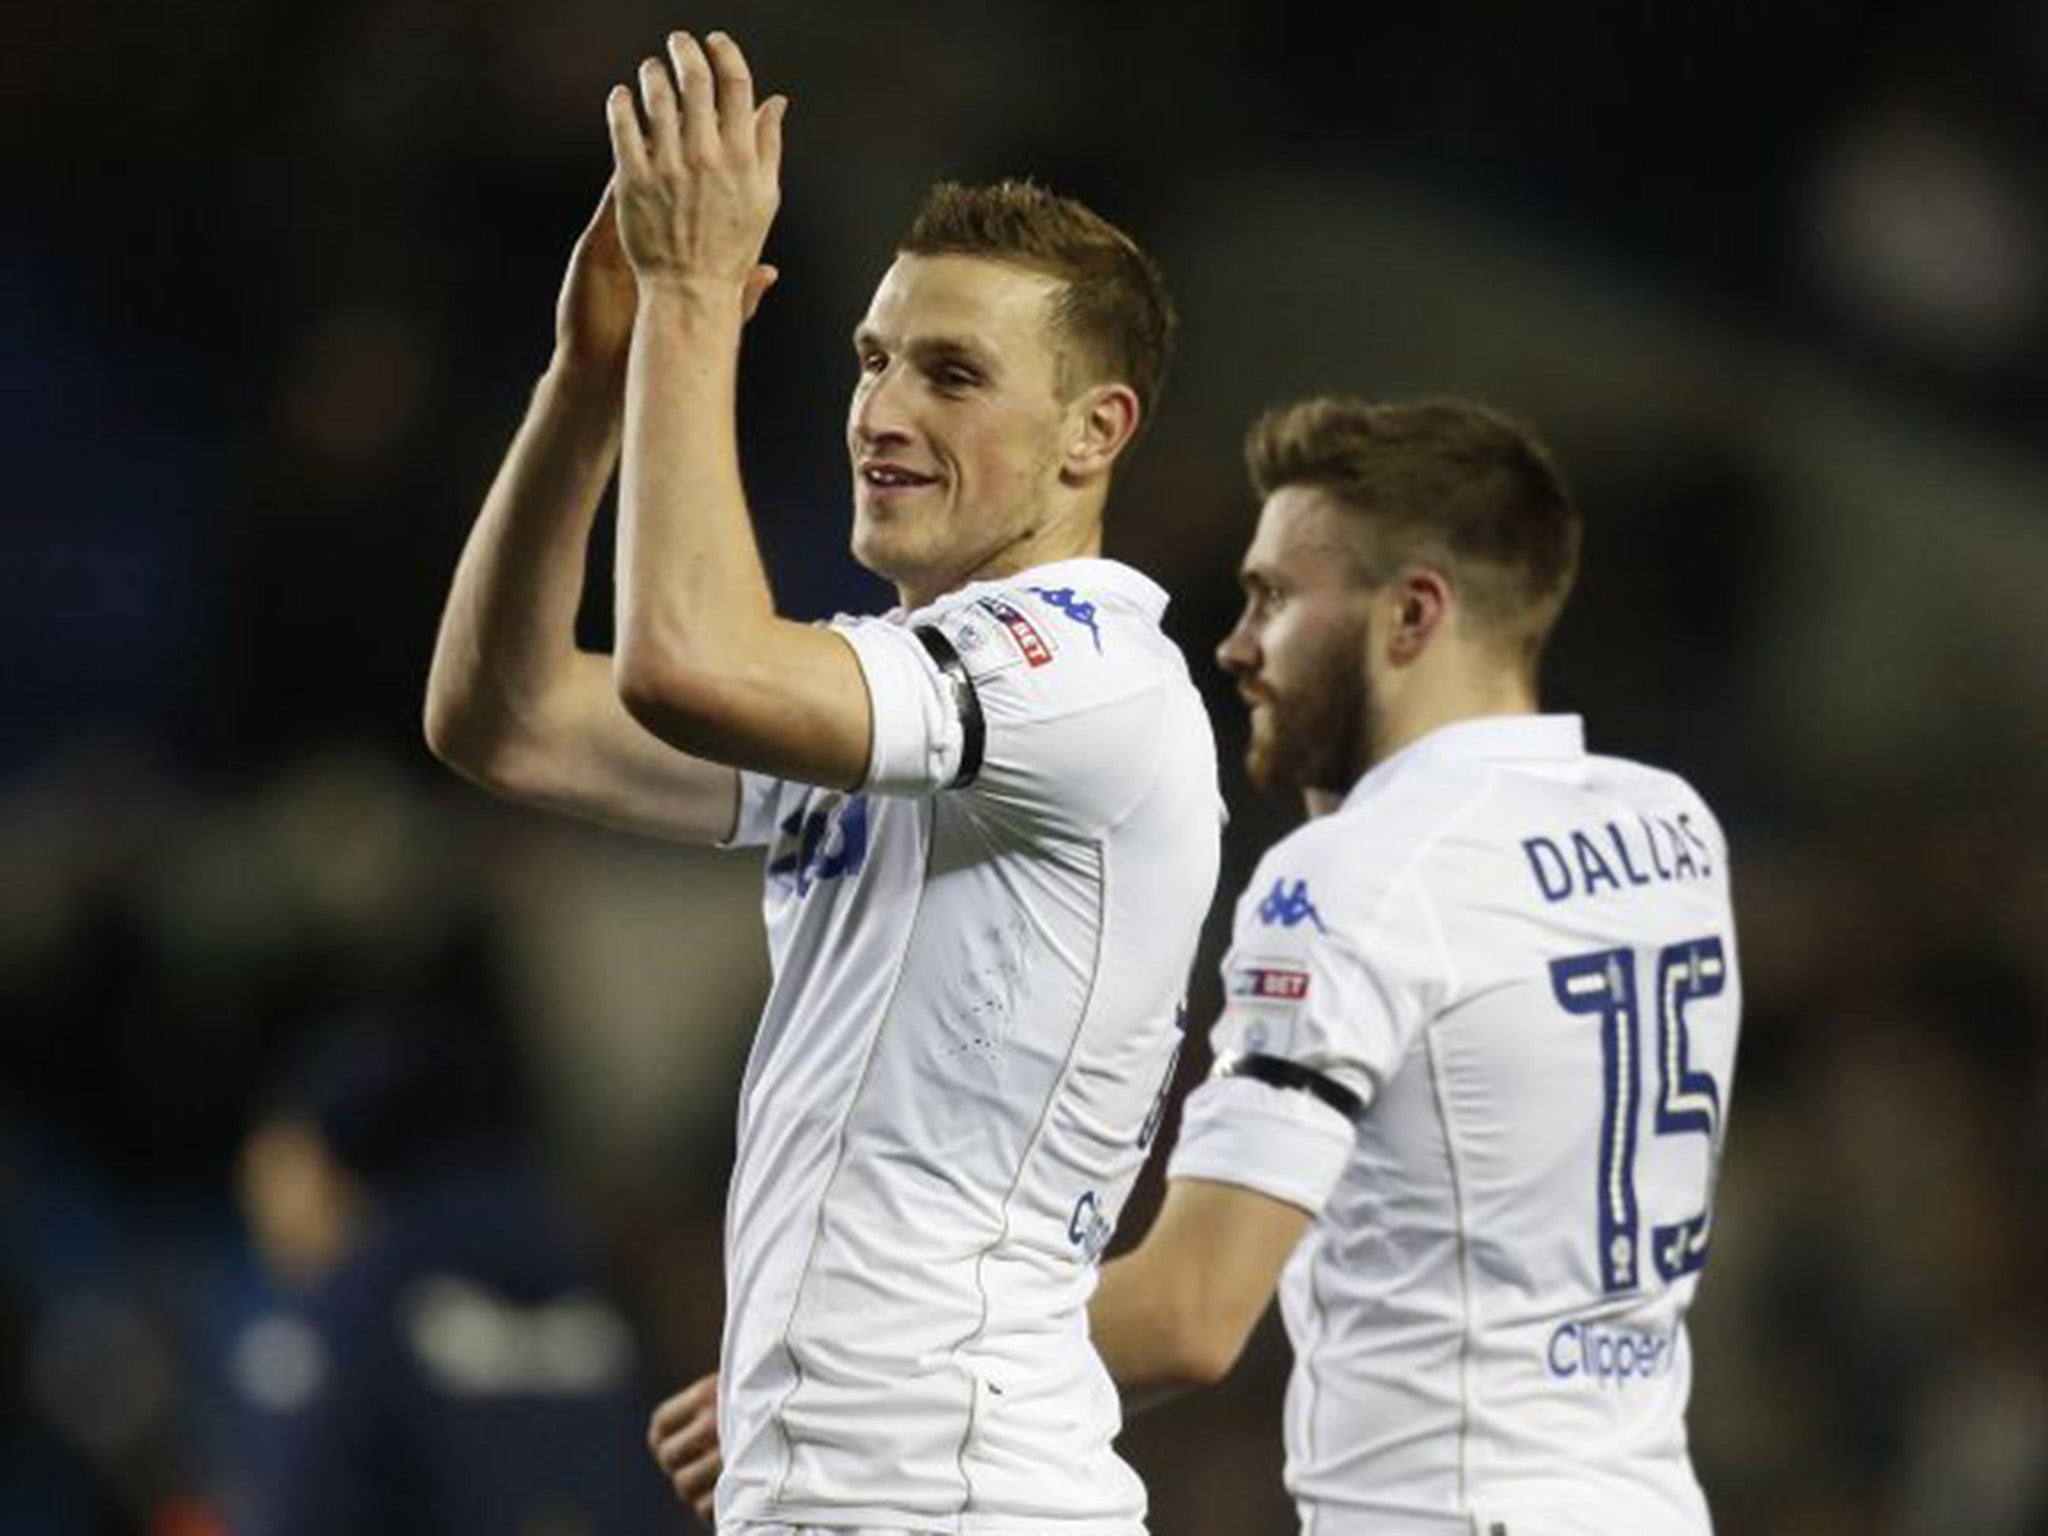 Wood scored late to seal Leeds' victory